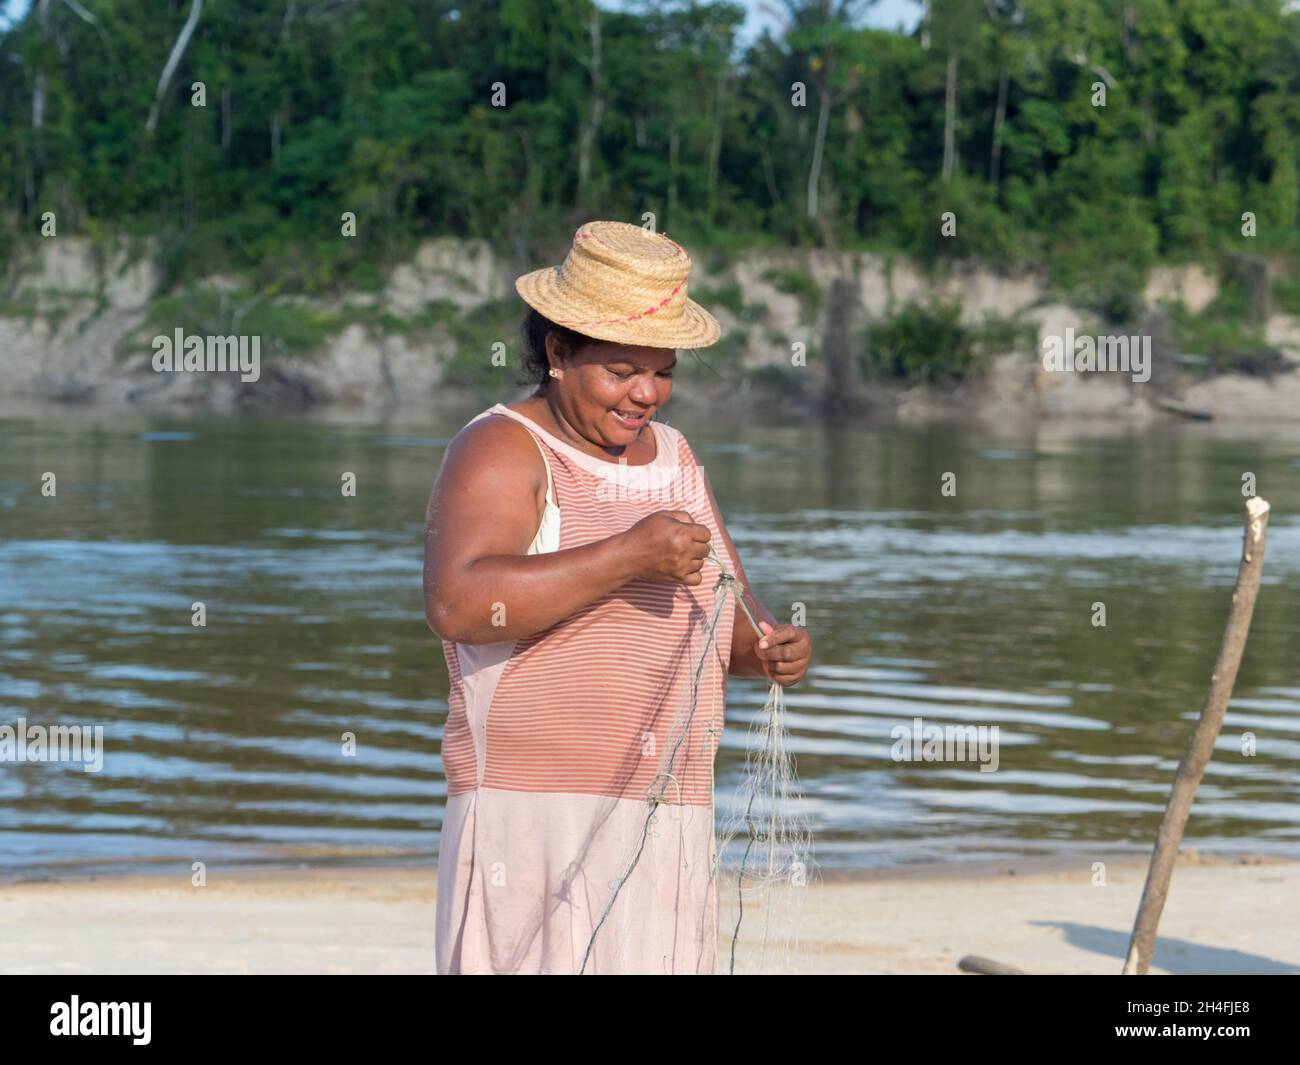 https://c8.alamy.com/comp/2H4FJE8/amazonia-latin-america-sep-2017-portrait-of-a-happy-woman-in-a-hat-a-local-inhabitant-of-the-amazon-rainforest-a-unraveling-fishing-web-on-a-sa-2H4FJE8.jpg